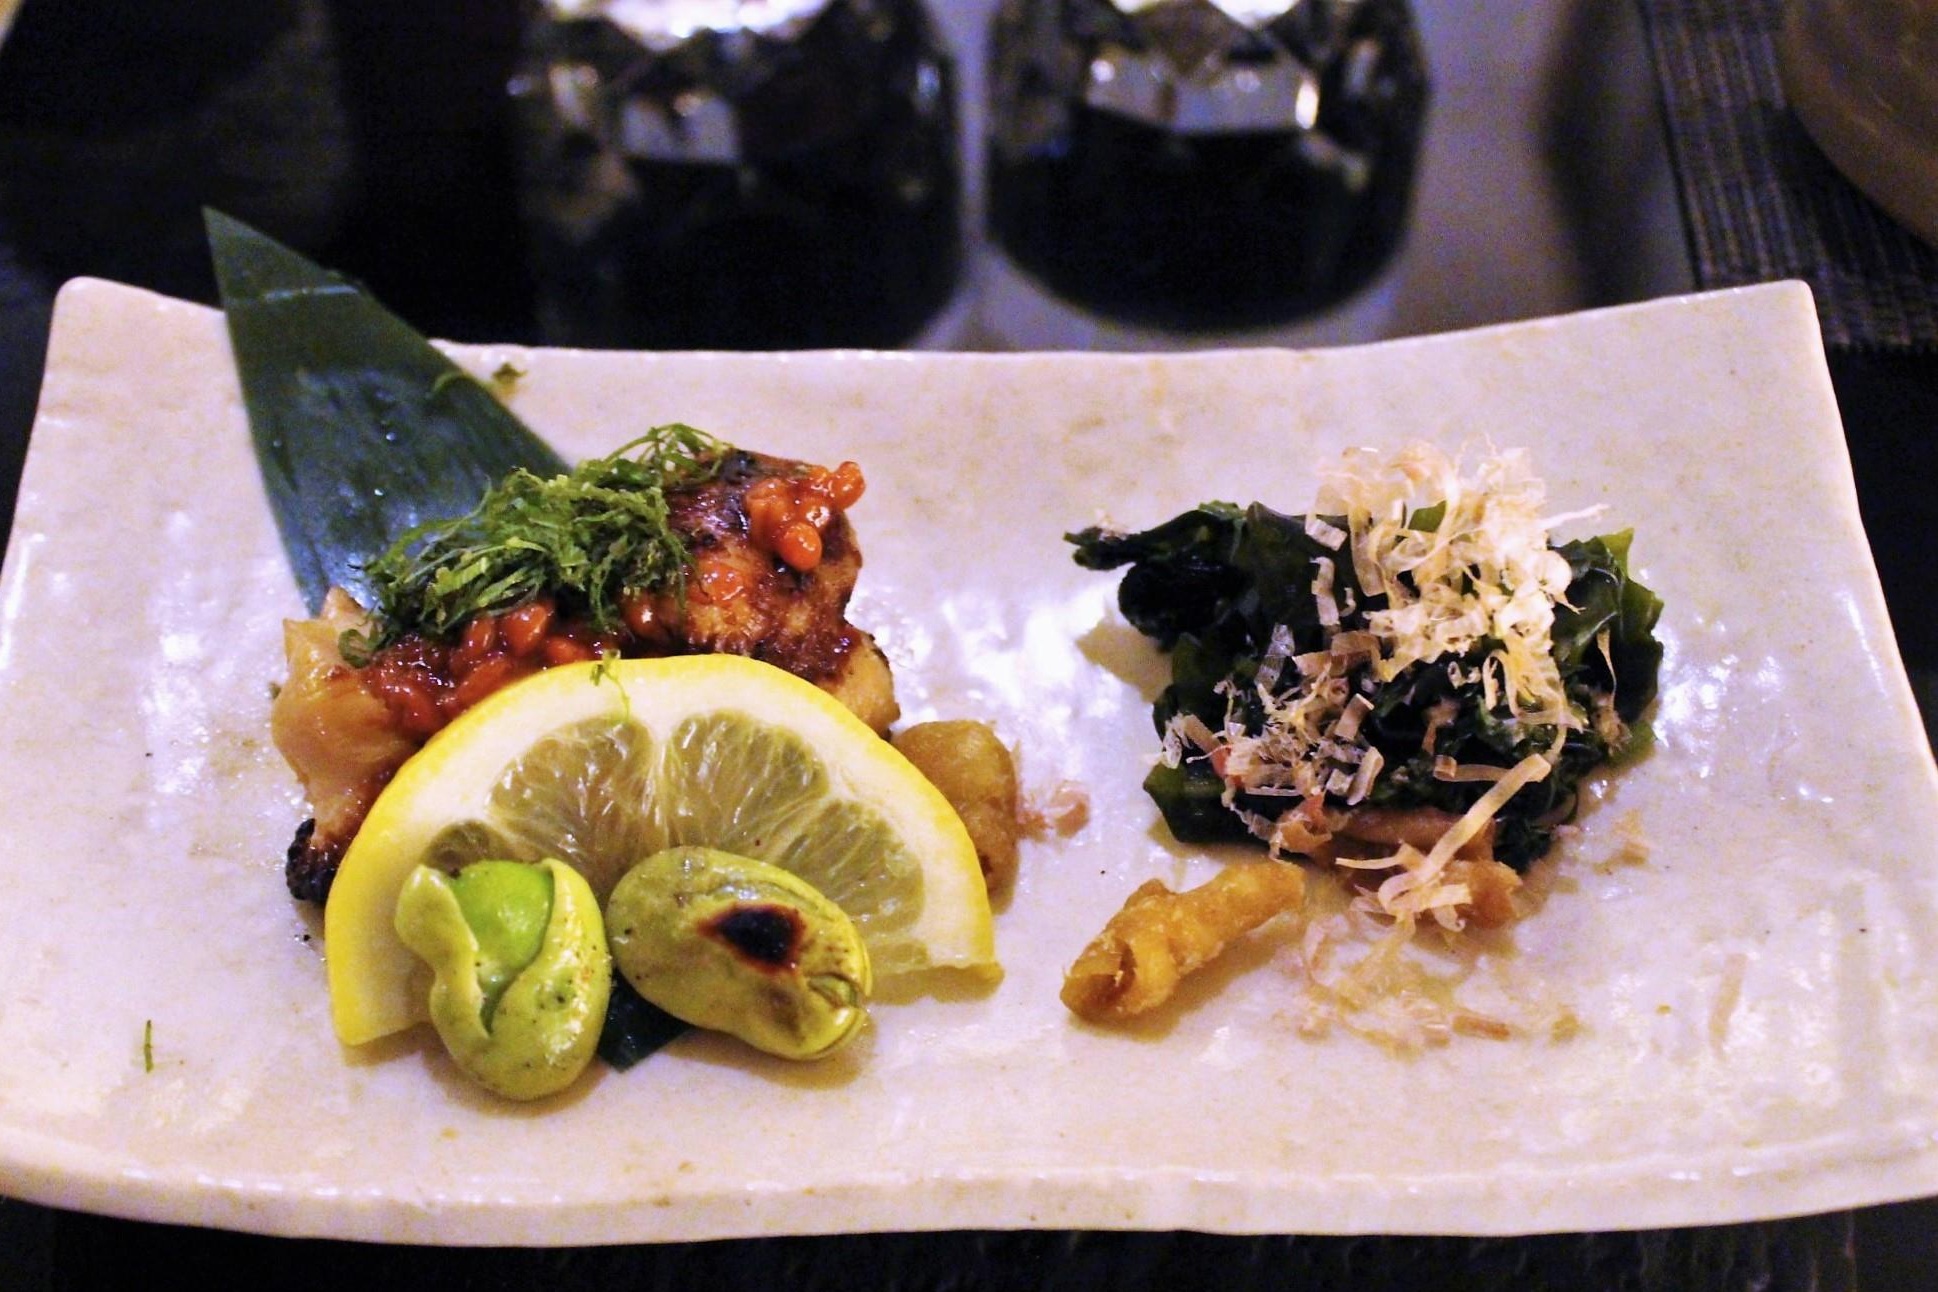 Chicken Thigh with Moromiso and Shiso Leaf; Seaweed, Bonito Flakes, Chicken Skin, and Shungiku Leaf